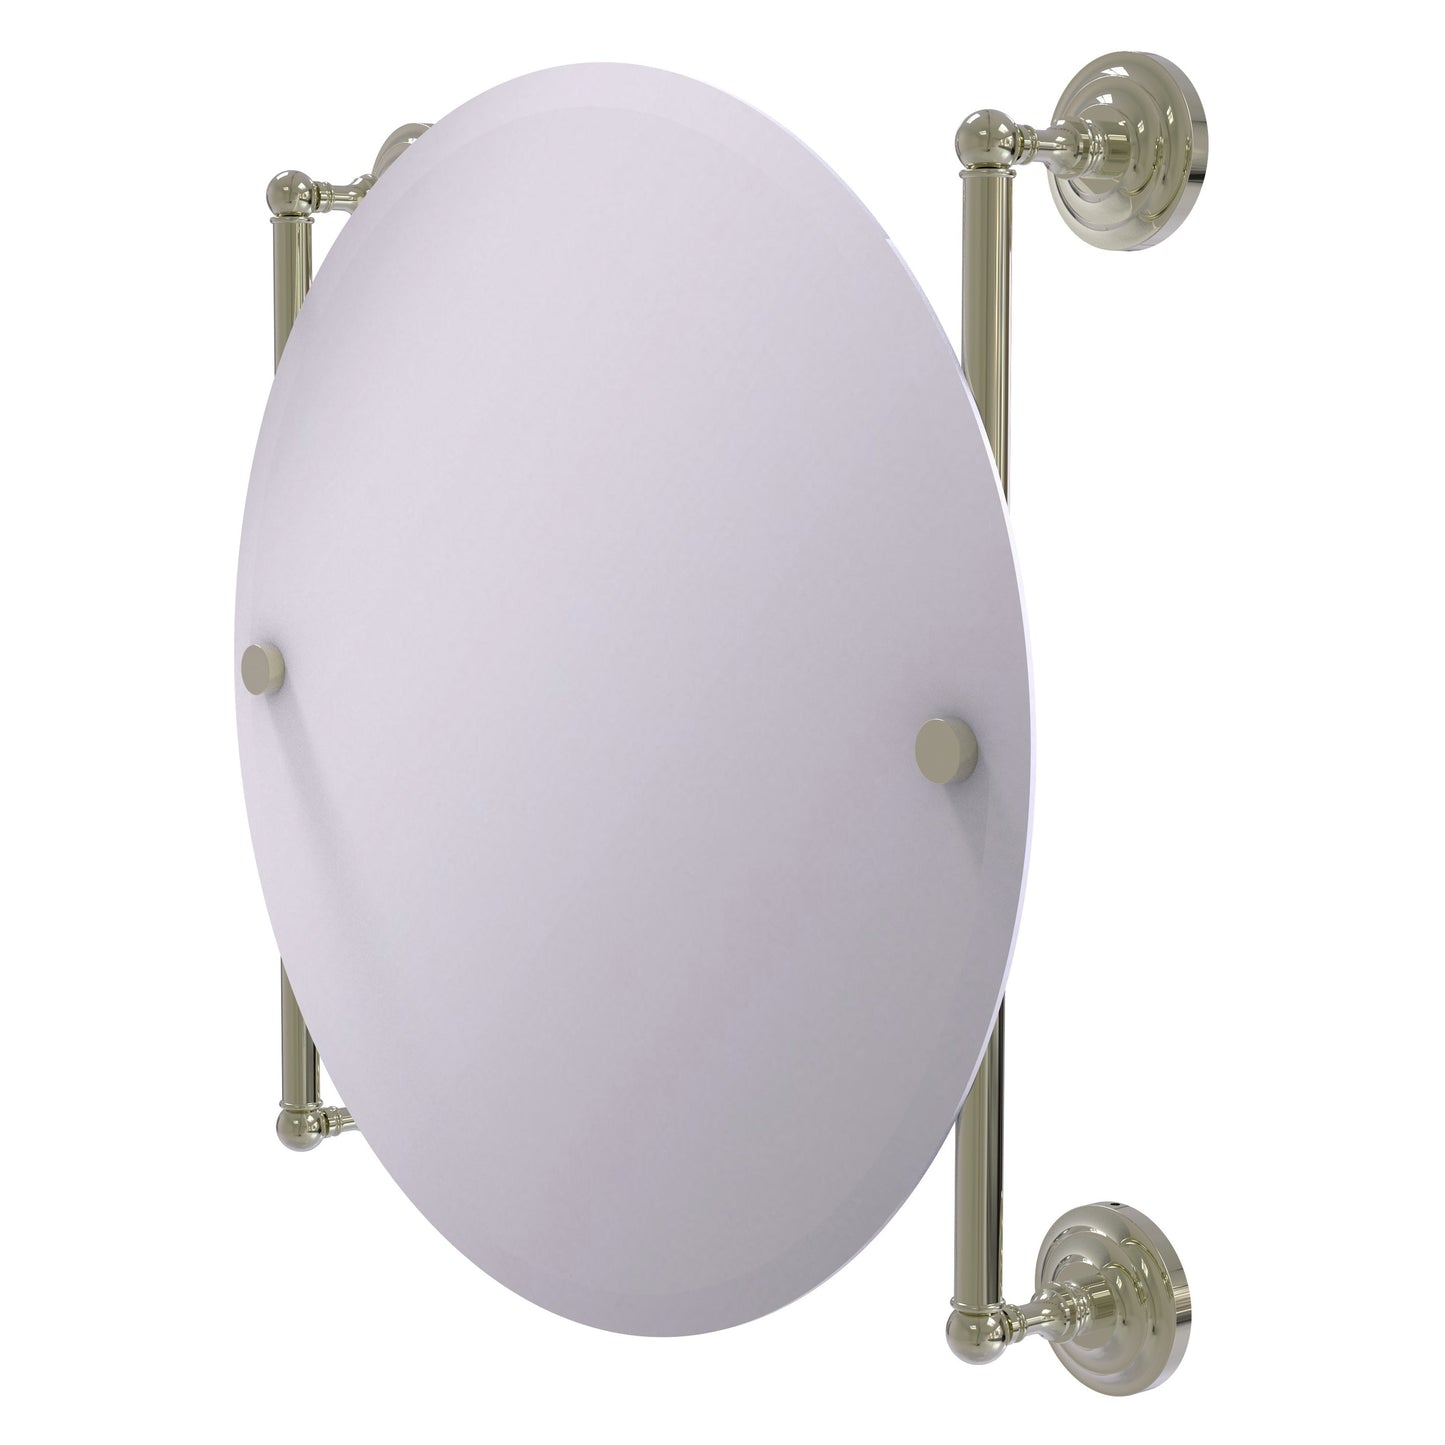 Allied Brass Que New 22" x 3.8" Polished Nickel Solid Brass Round Frameless Rail Mounted Mirror